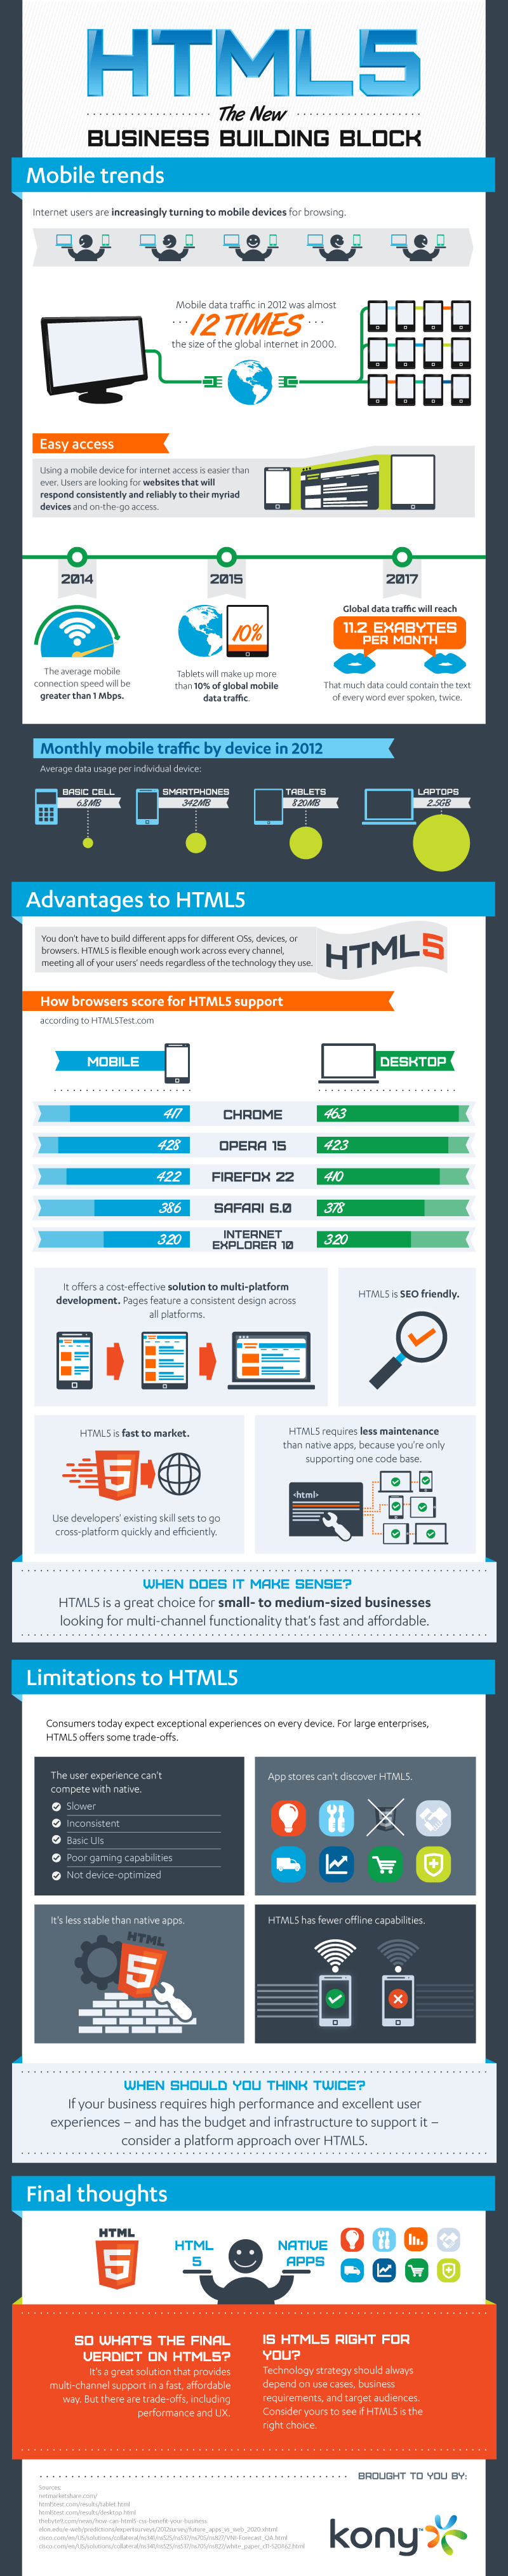 The Pros and Cons of HTML5